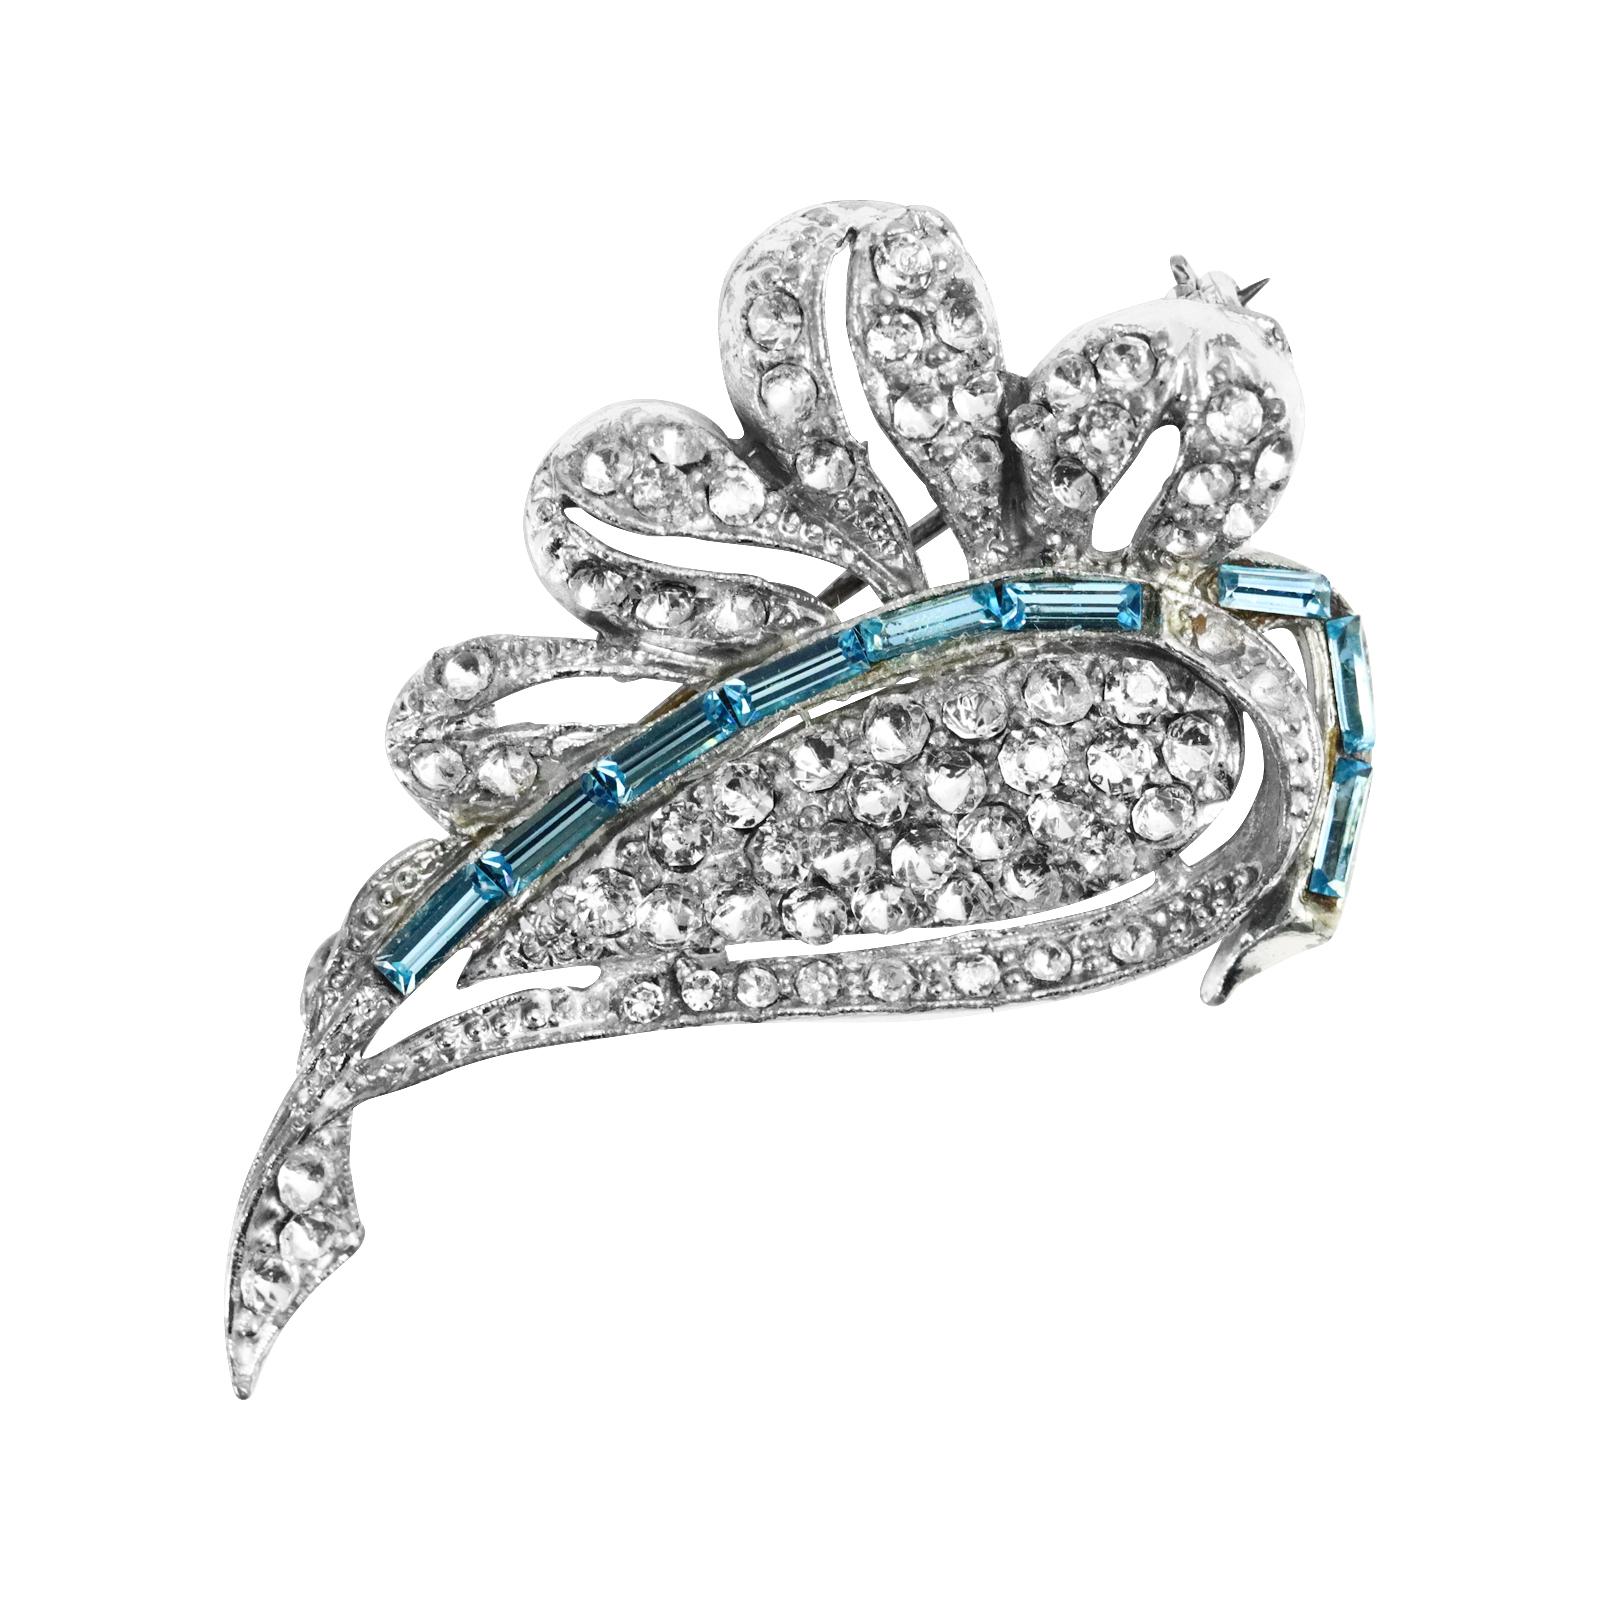 Vintage Diamante Leaf with Pave and Blue Baguette Brooch Circa 1960s. The brooch is made of  pave with a line of light blue baguettes running through it.  The offset of color makes the brooch. These brooches really are such a gorgeous representation